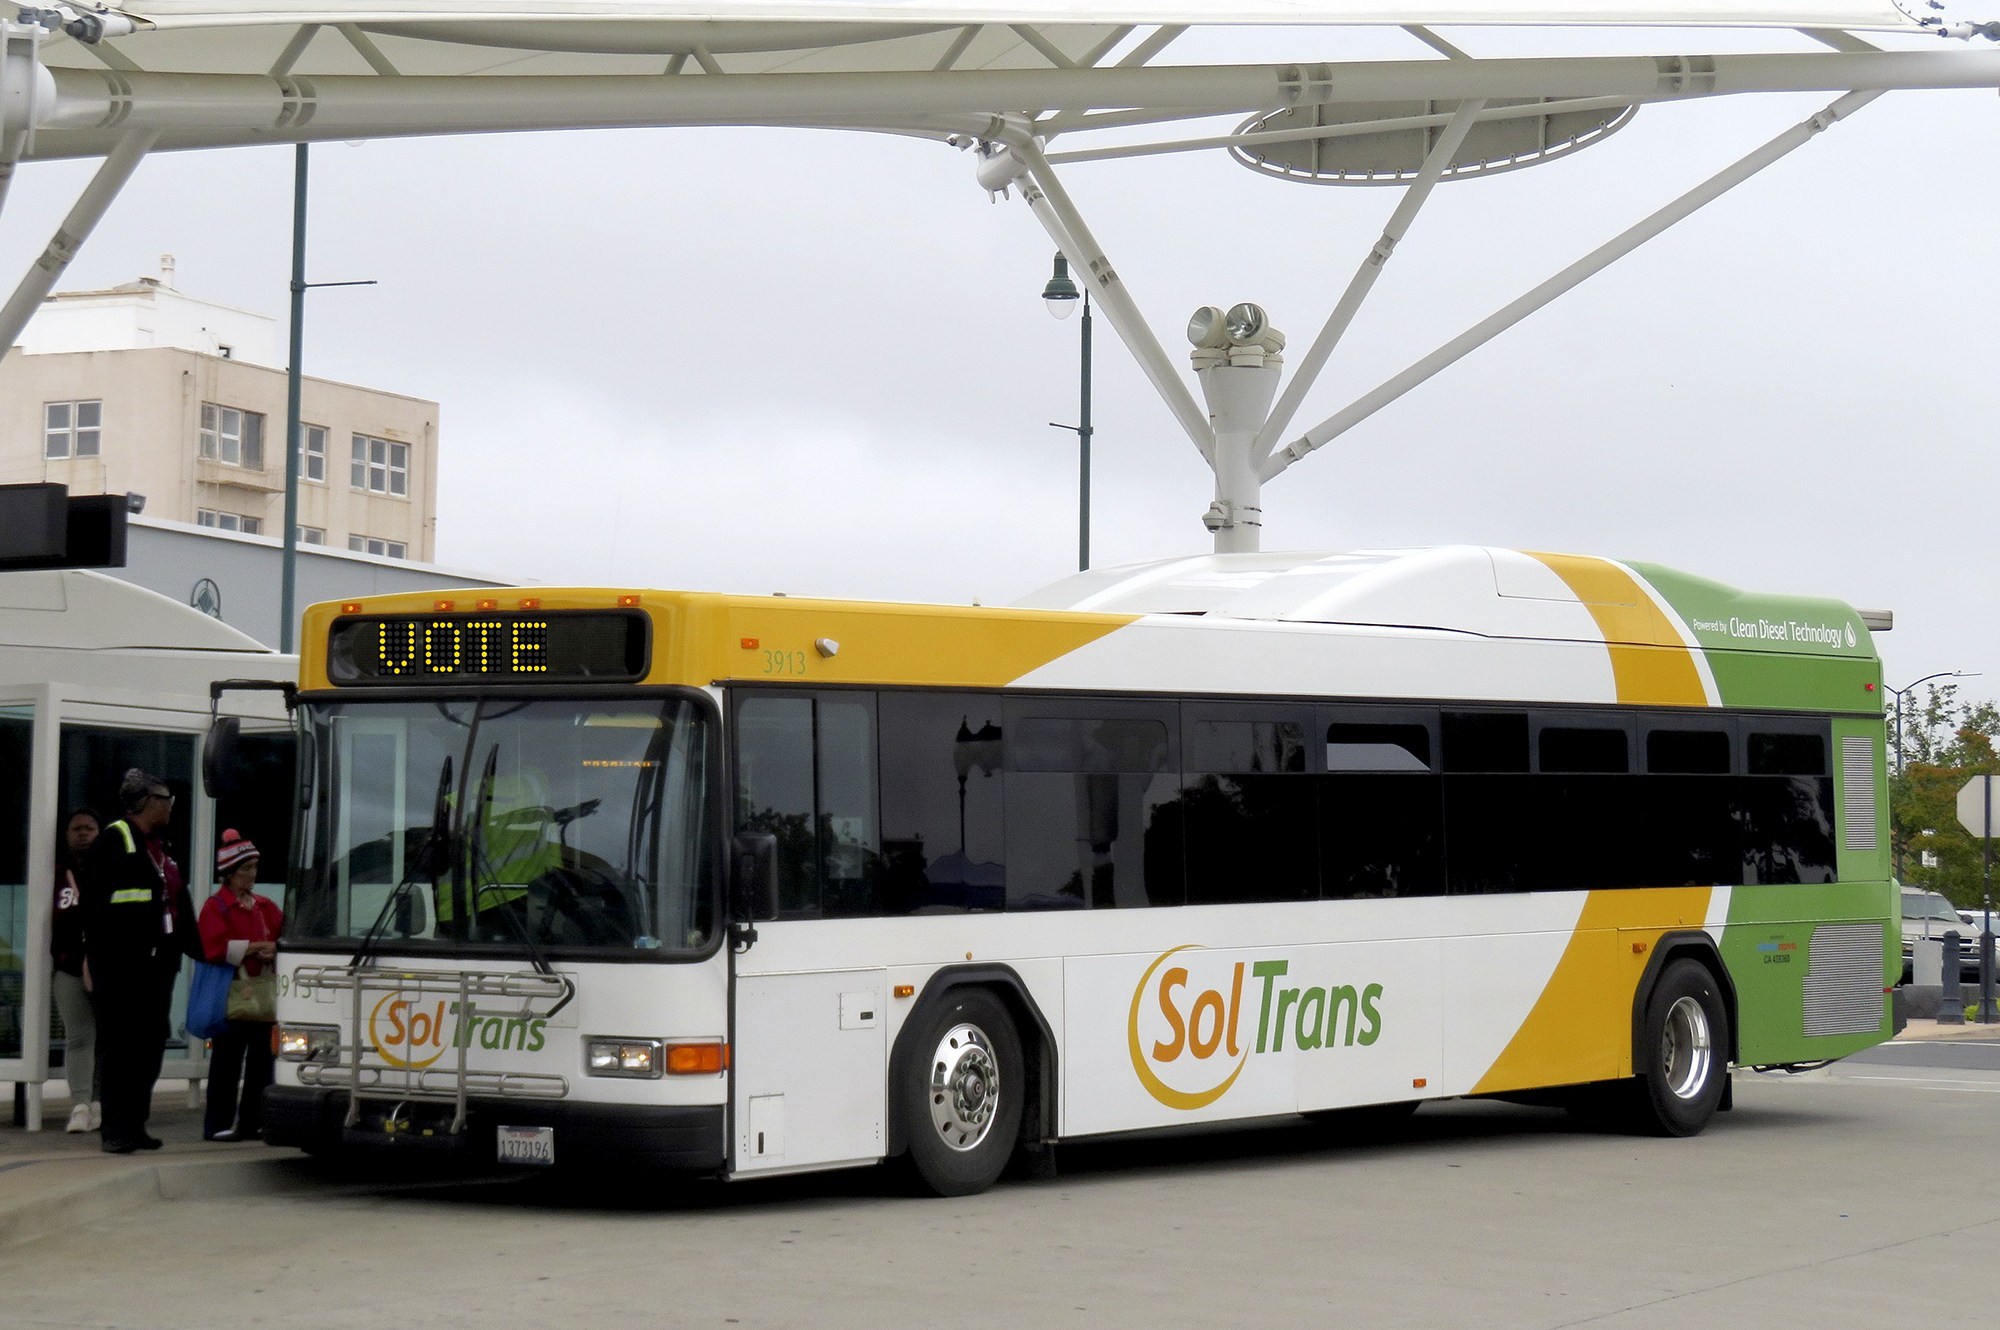 A SolTrans bus is parked at a station with passengers boarding. The bus is white with green and yellow accents, branded with the SolTrans logo. Its destination sign reads 